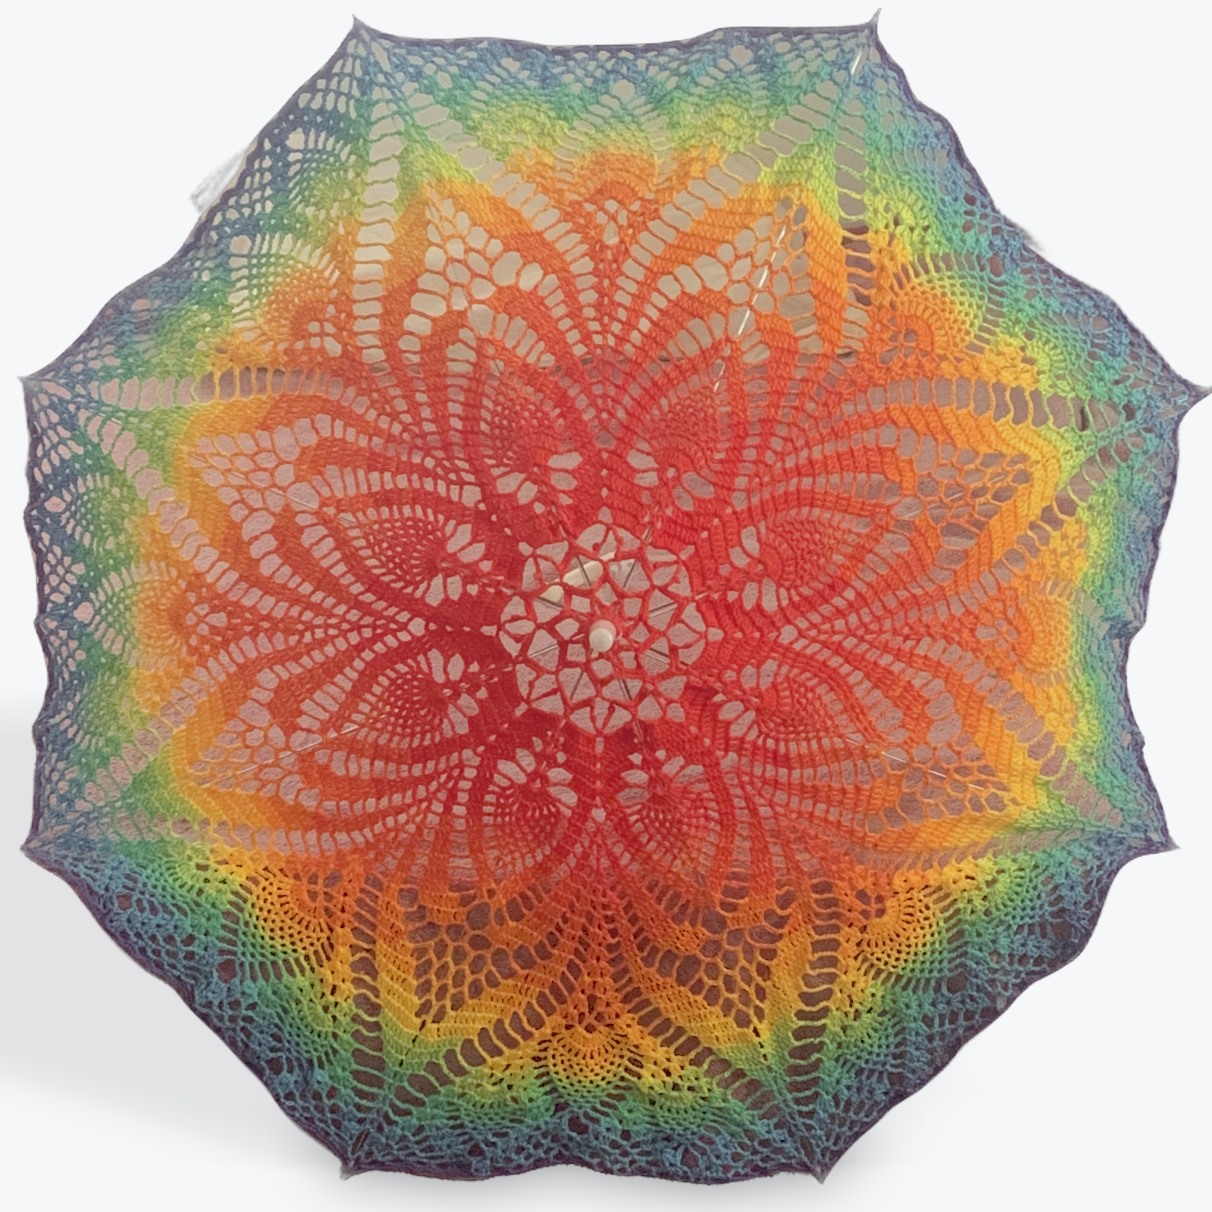 Gay Pride Rainbow Parasol - 3 Pineapple Pattern - Stitchy Frood